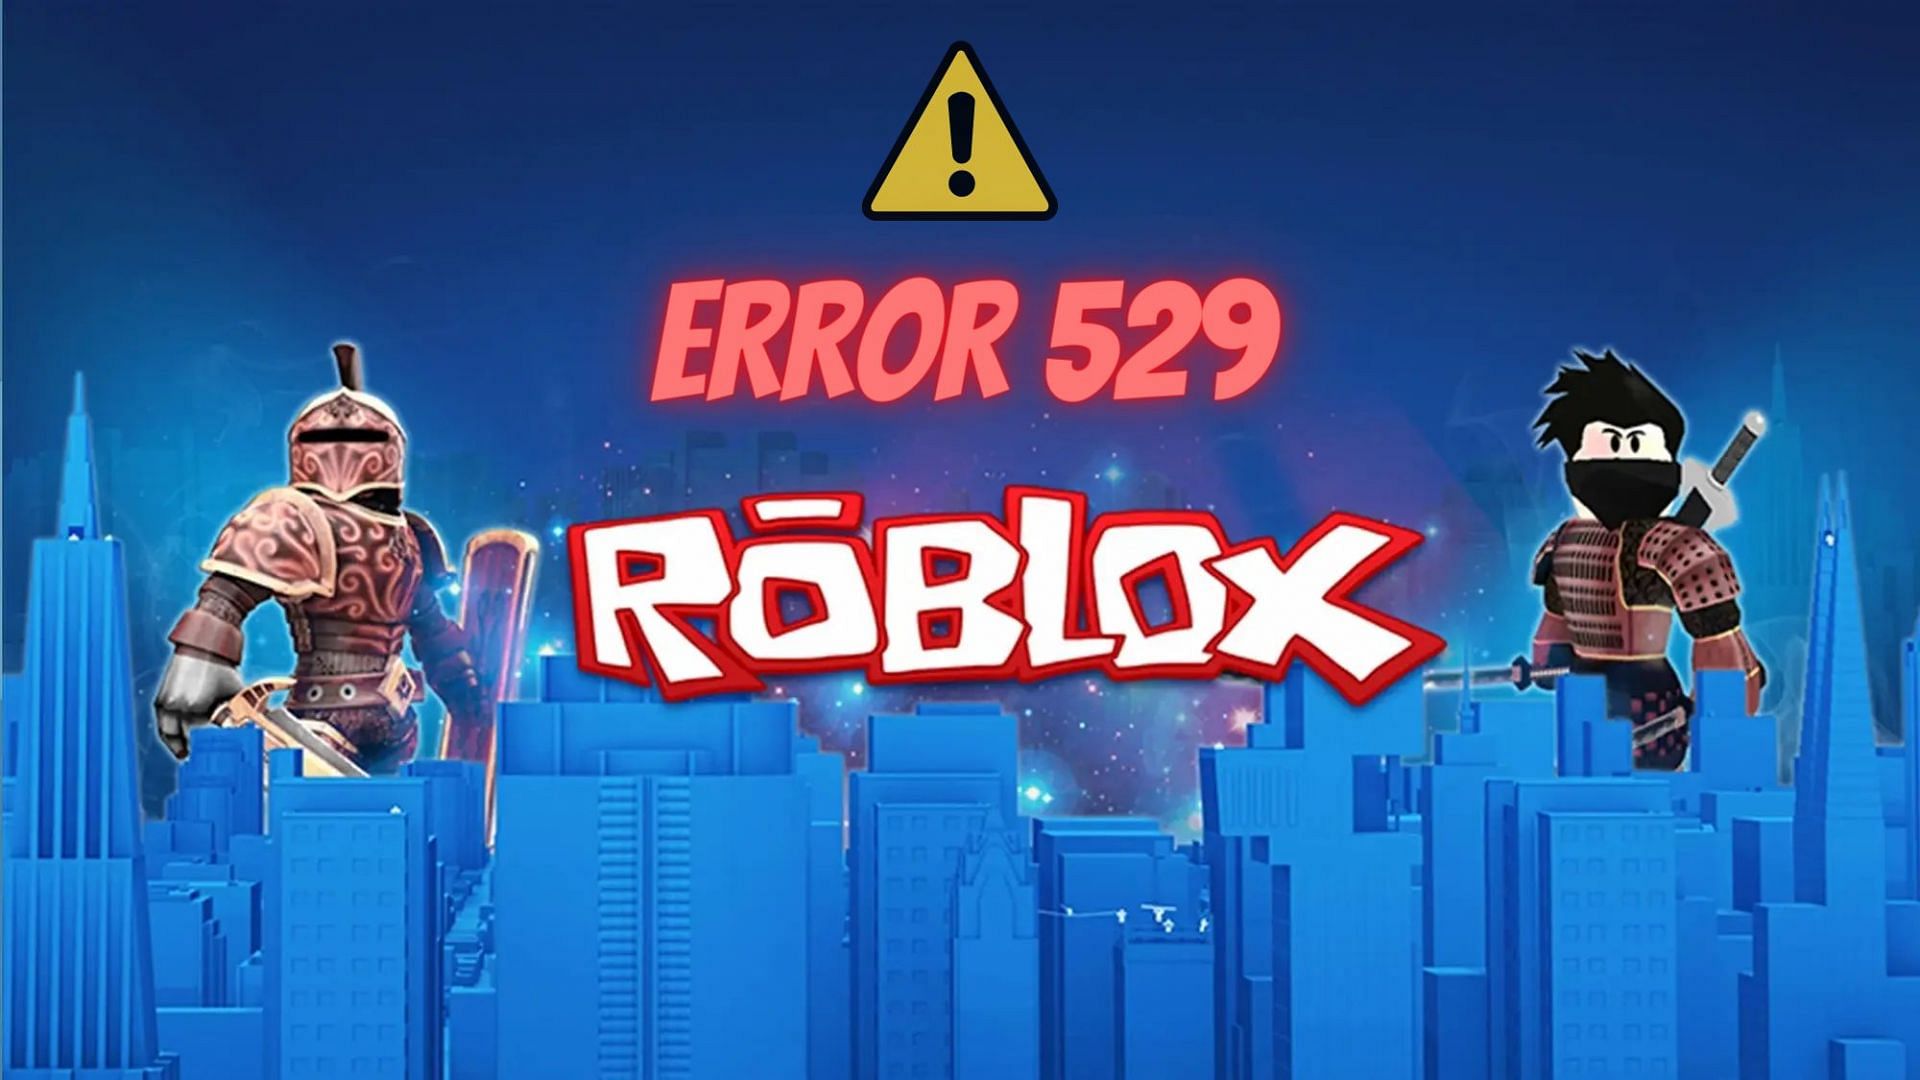 Game continues to crash when launching from roblox site, or even